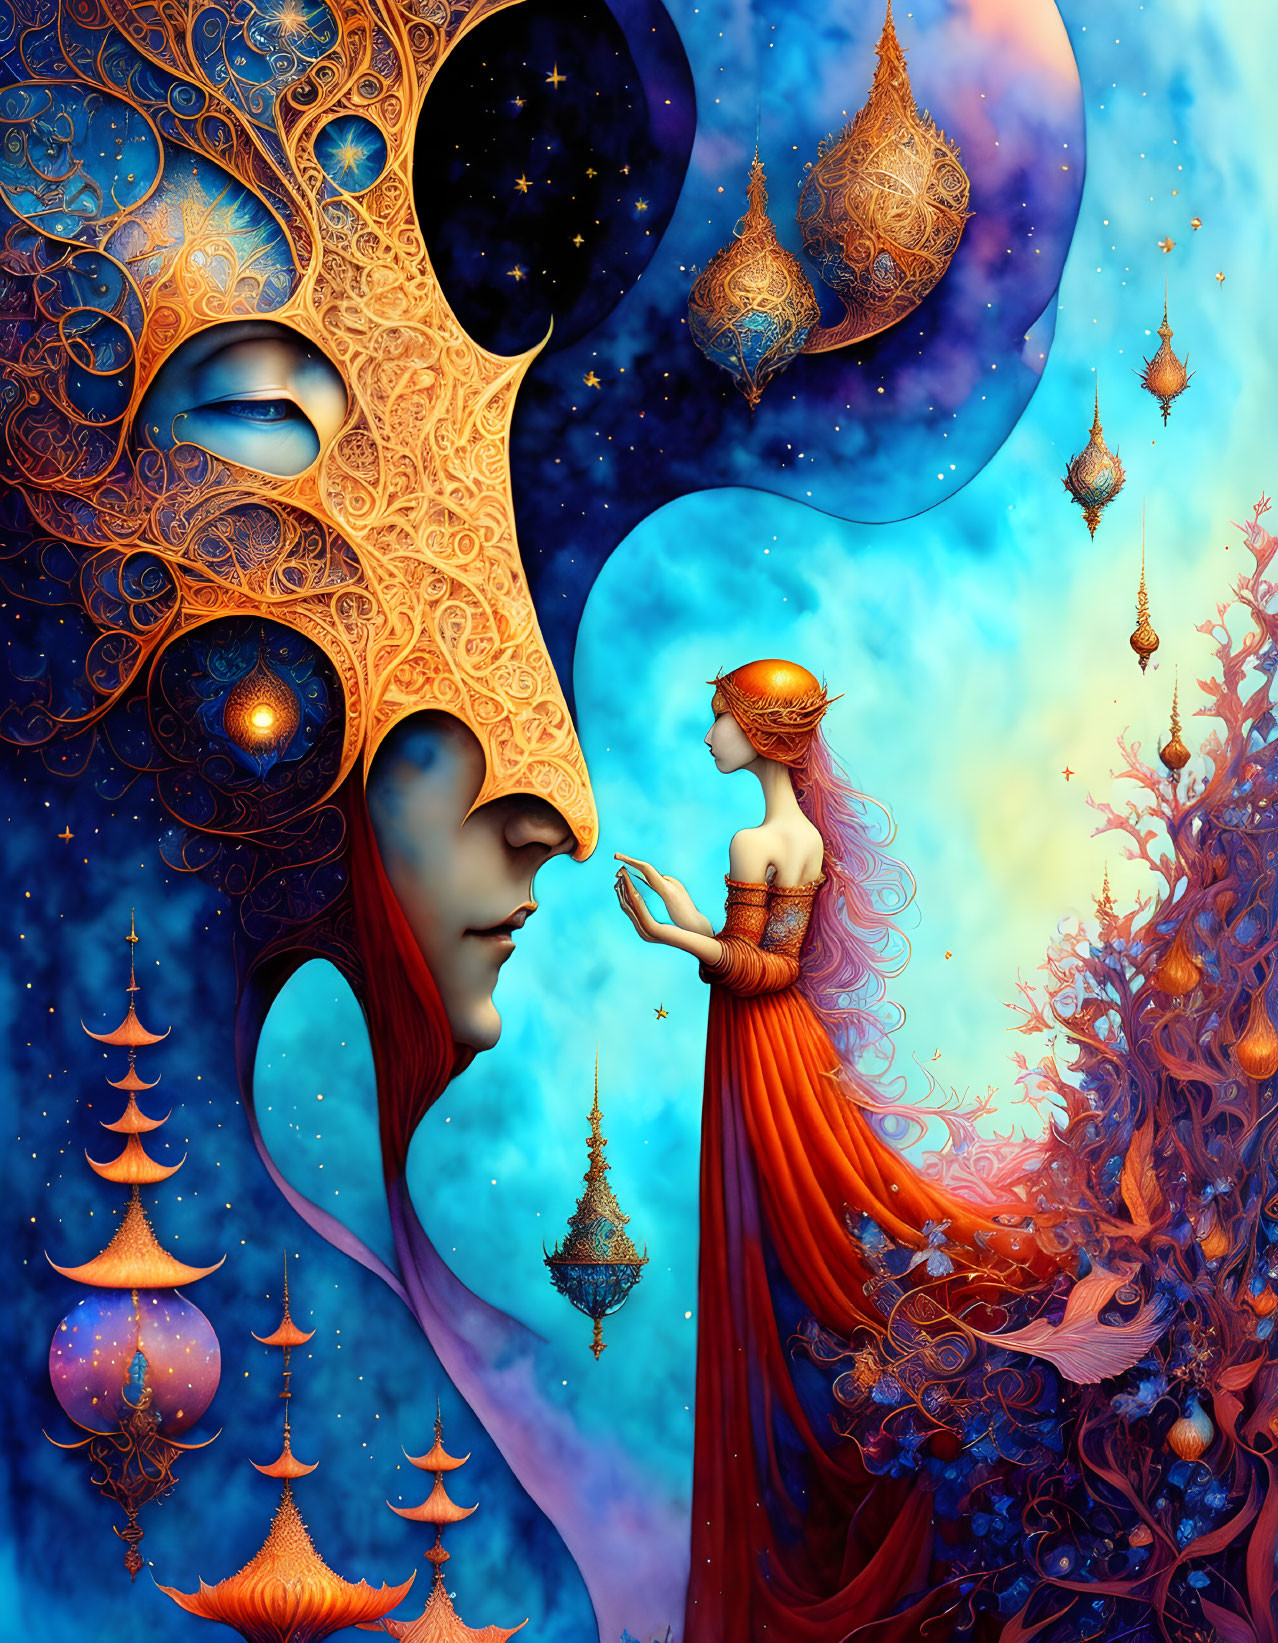 Fantasy image: Celestial face, woman in orange gown, floating lanterns in cosmic setting